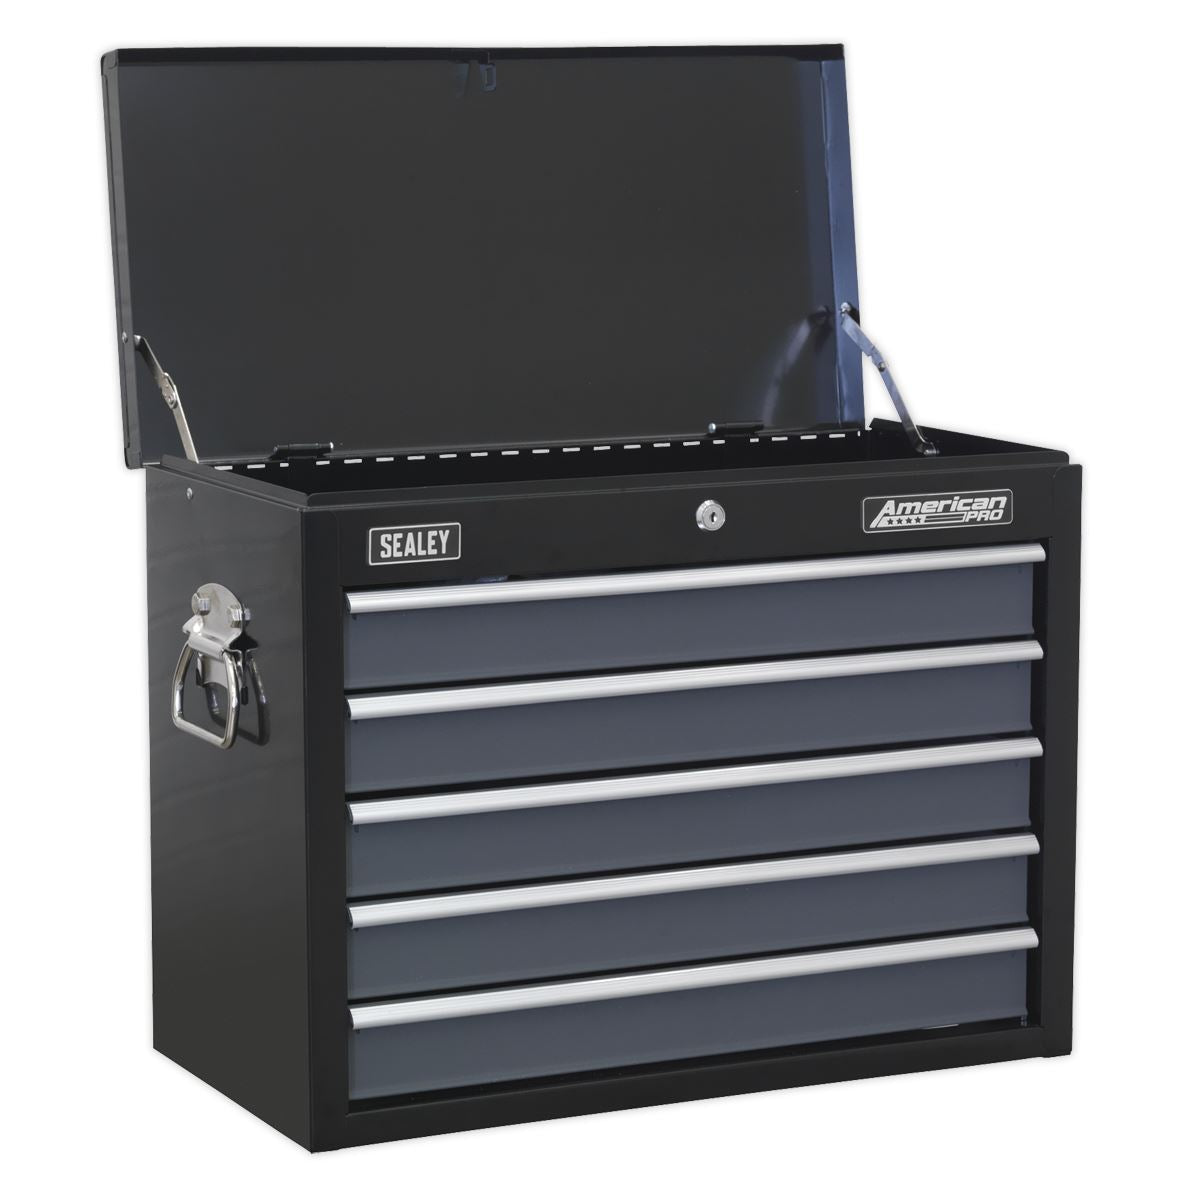 Sealey Topchest 5 Drawer with Ball Bearing Slides - Black/Grey AP3505TB